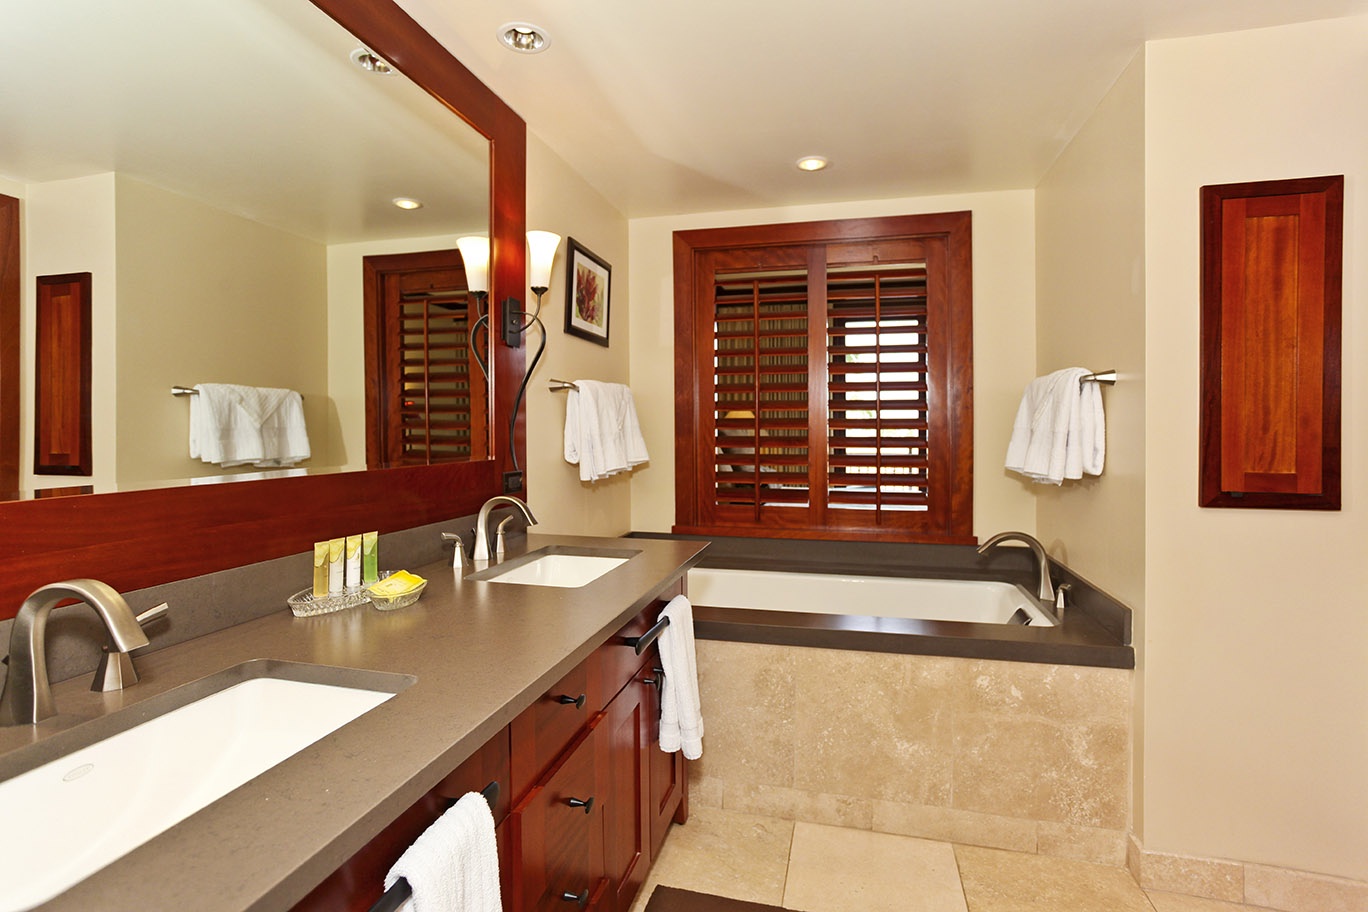 Kapolei Vacation Rentals, Ko Olina Beach Villas B301 - The primary guest bathroom with a lovely soaking tub and double vanity.